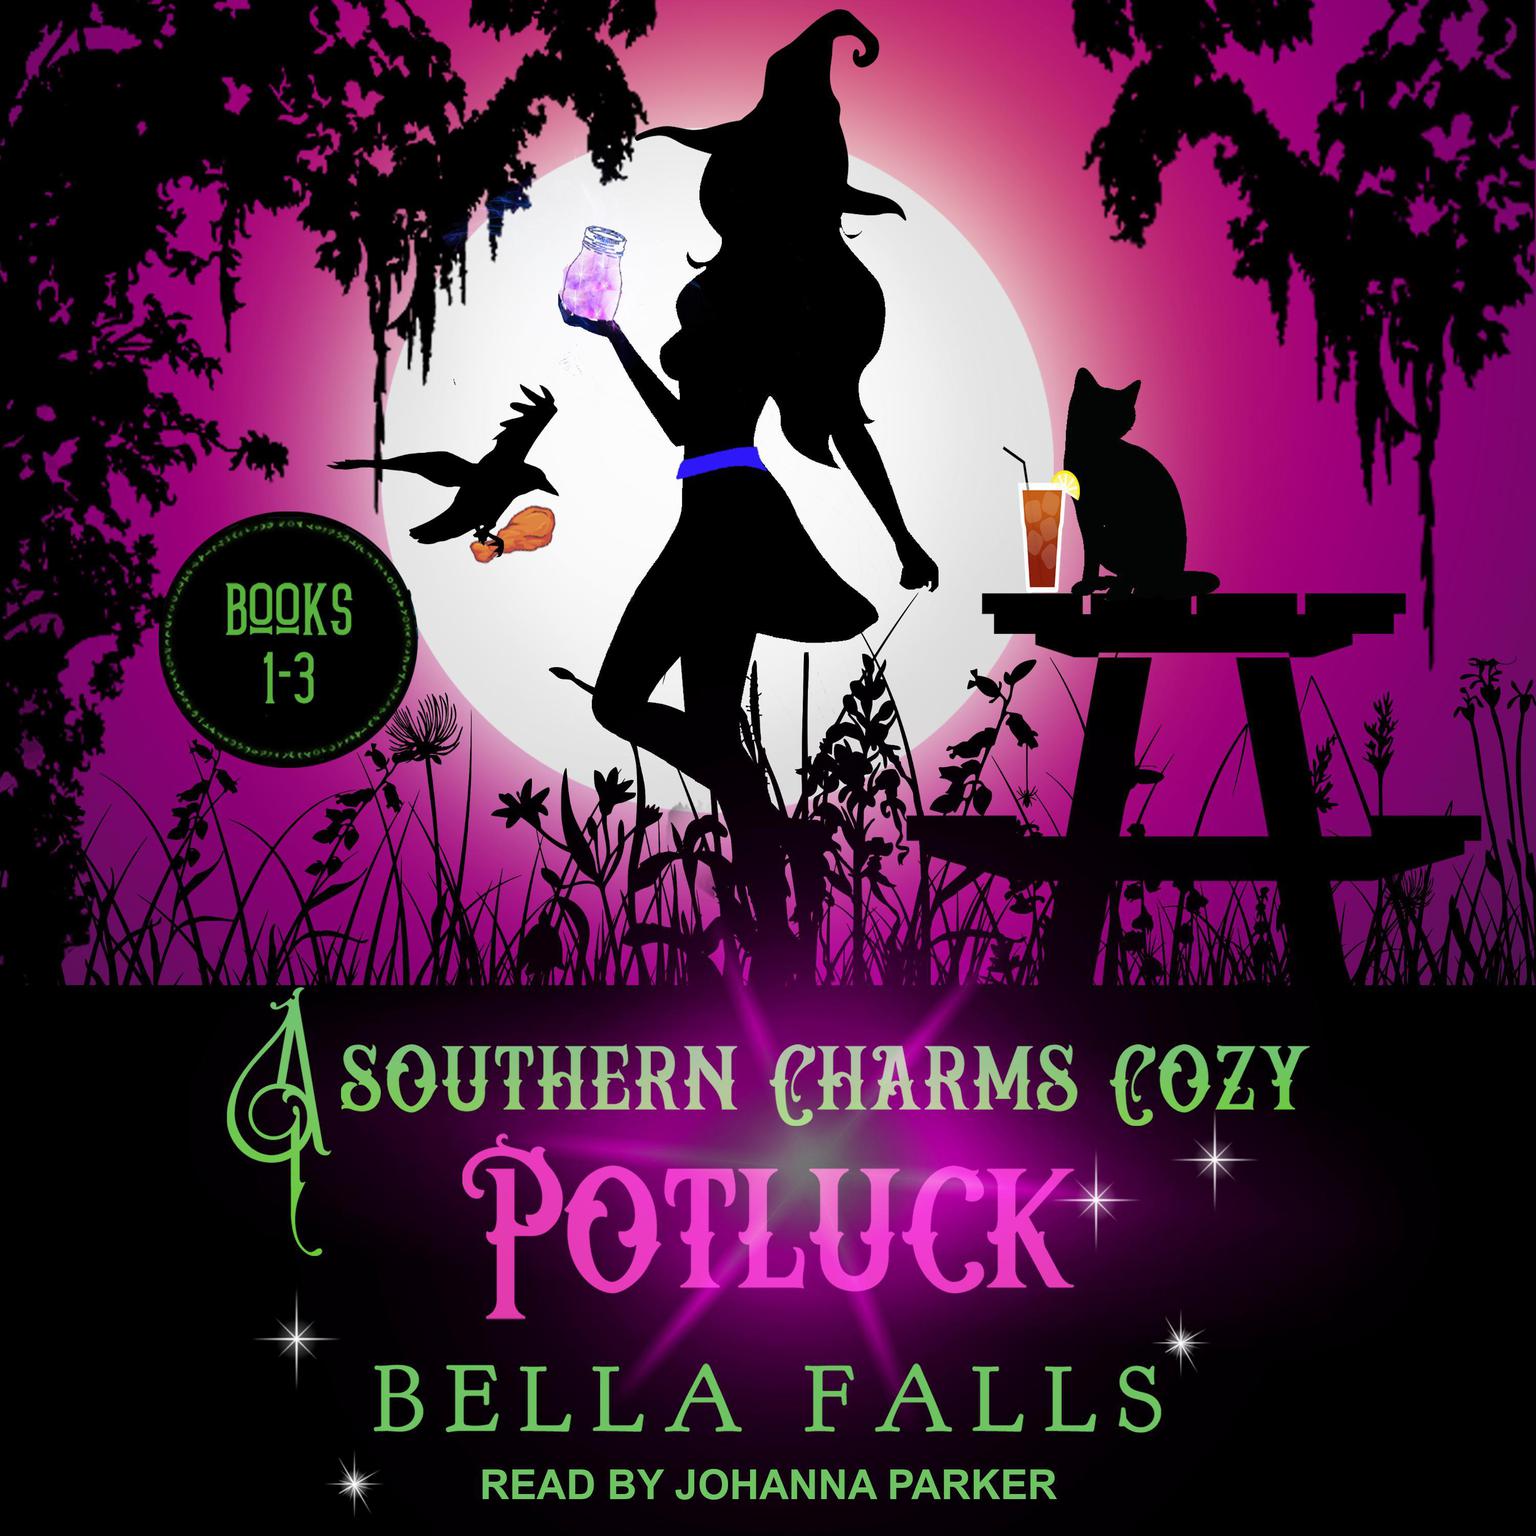 A Southern Charms Cozy Potluck: A Paranormal Cozy Mystery Box Set Books 1-3 Audiobook, by Bella Falls